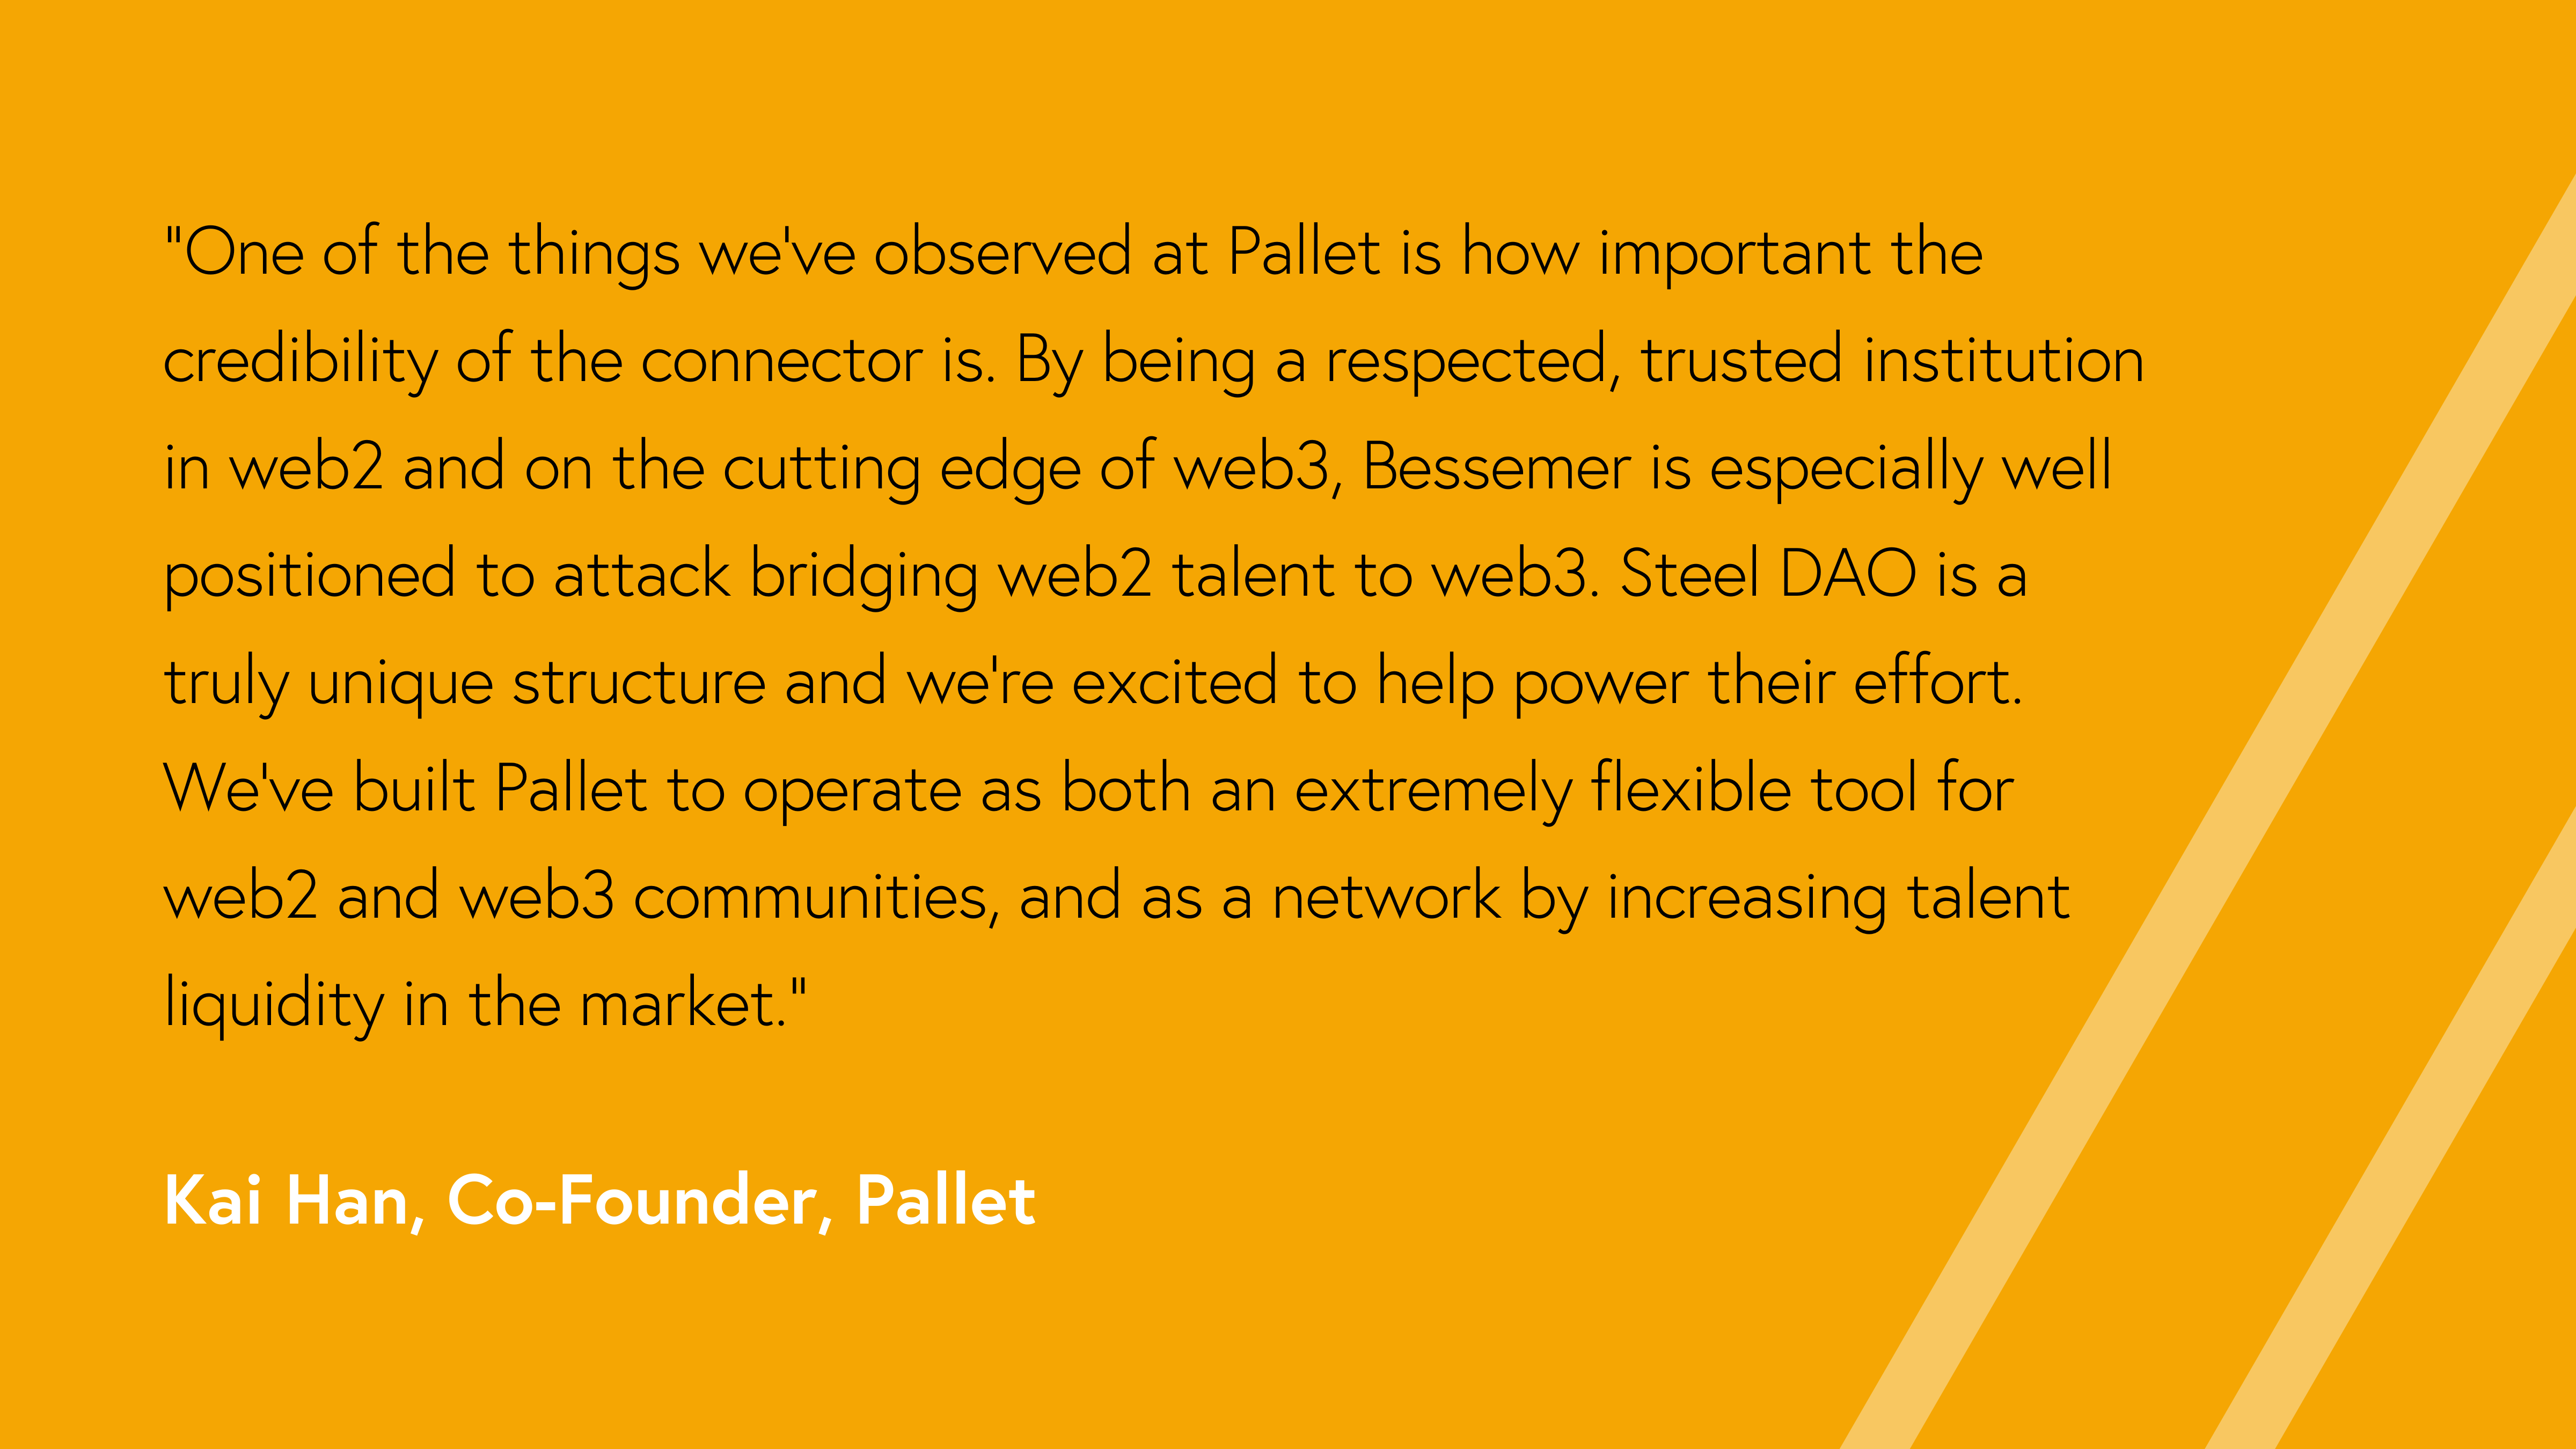 “One of the things we’ve observed at Pallet is how important the credibility of the connector is. By being a respected, trusted institution in web2 and on the cutting edge of web3, Bessemer is especially well positioned to attack bridging web2 talent to web3. Steel DAO is a truly unique structure and we’re excited to help power their effort. We’ve built Pallet to operate as both an extremely flexible tool for web2 and web3 communities, and as a network by increasing talent liquidity in the market.”  Kai Han, Co-Founder, Pallet